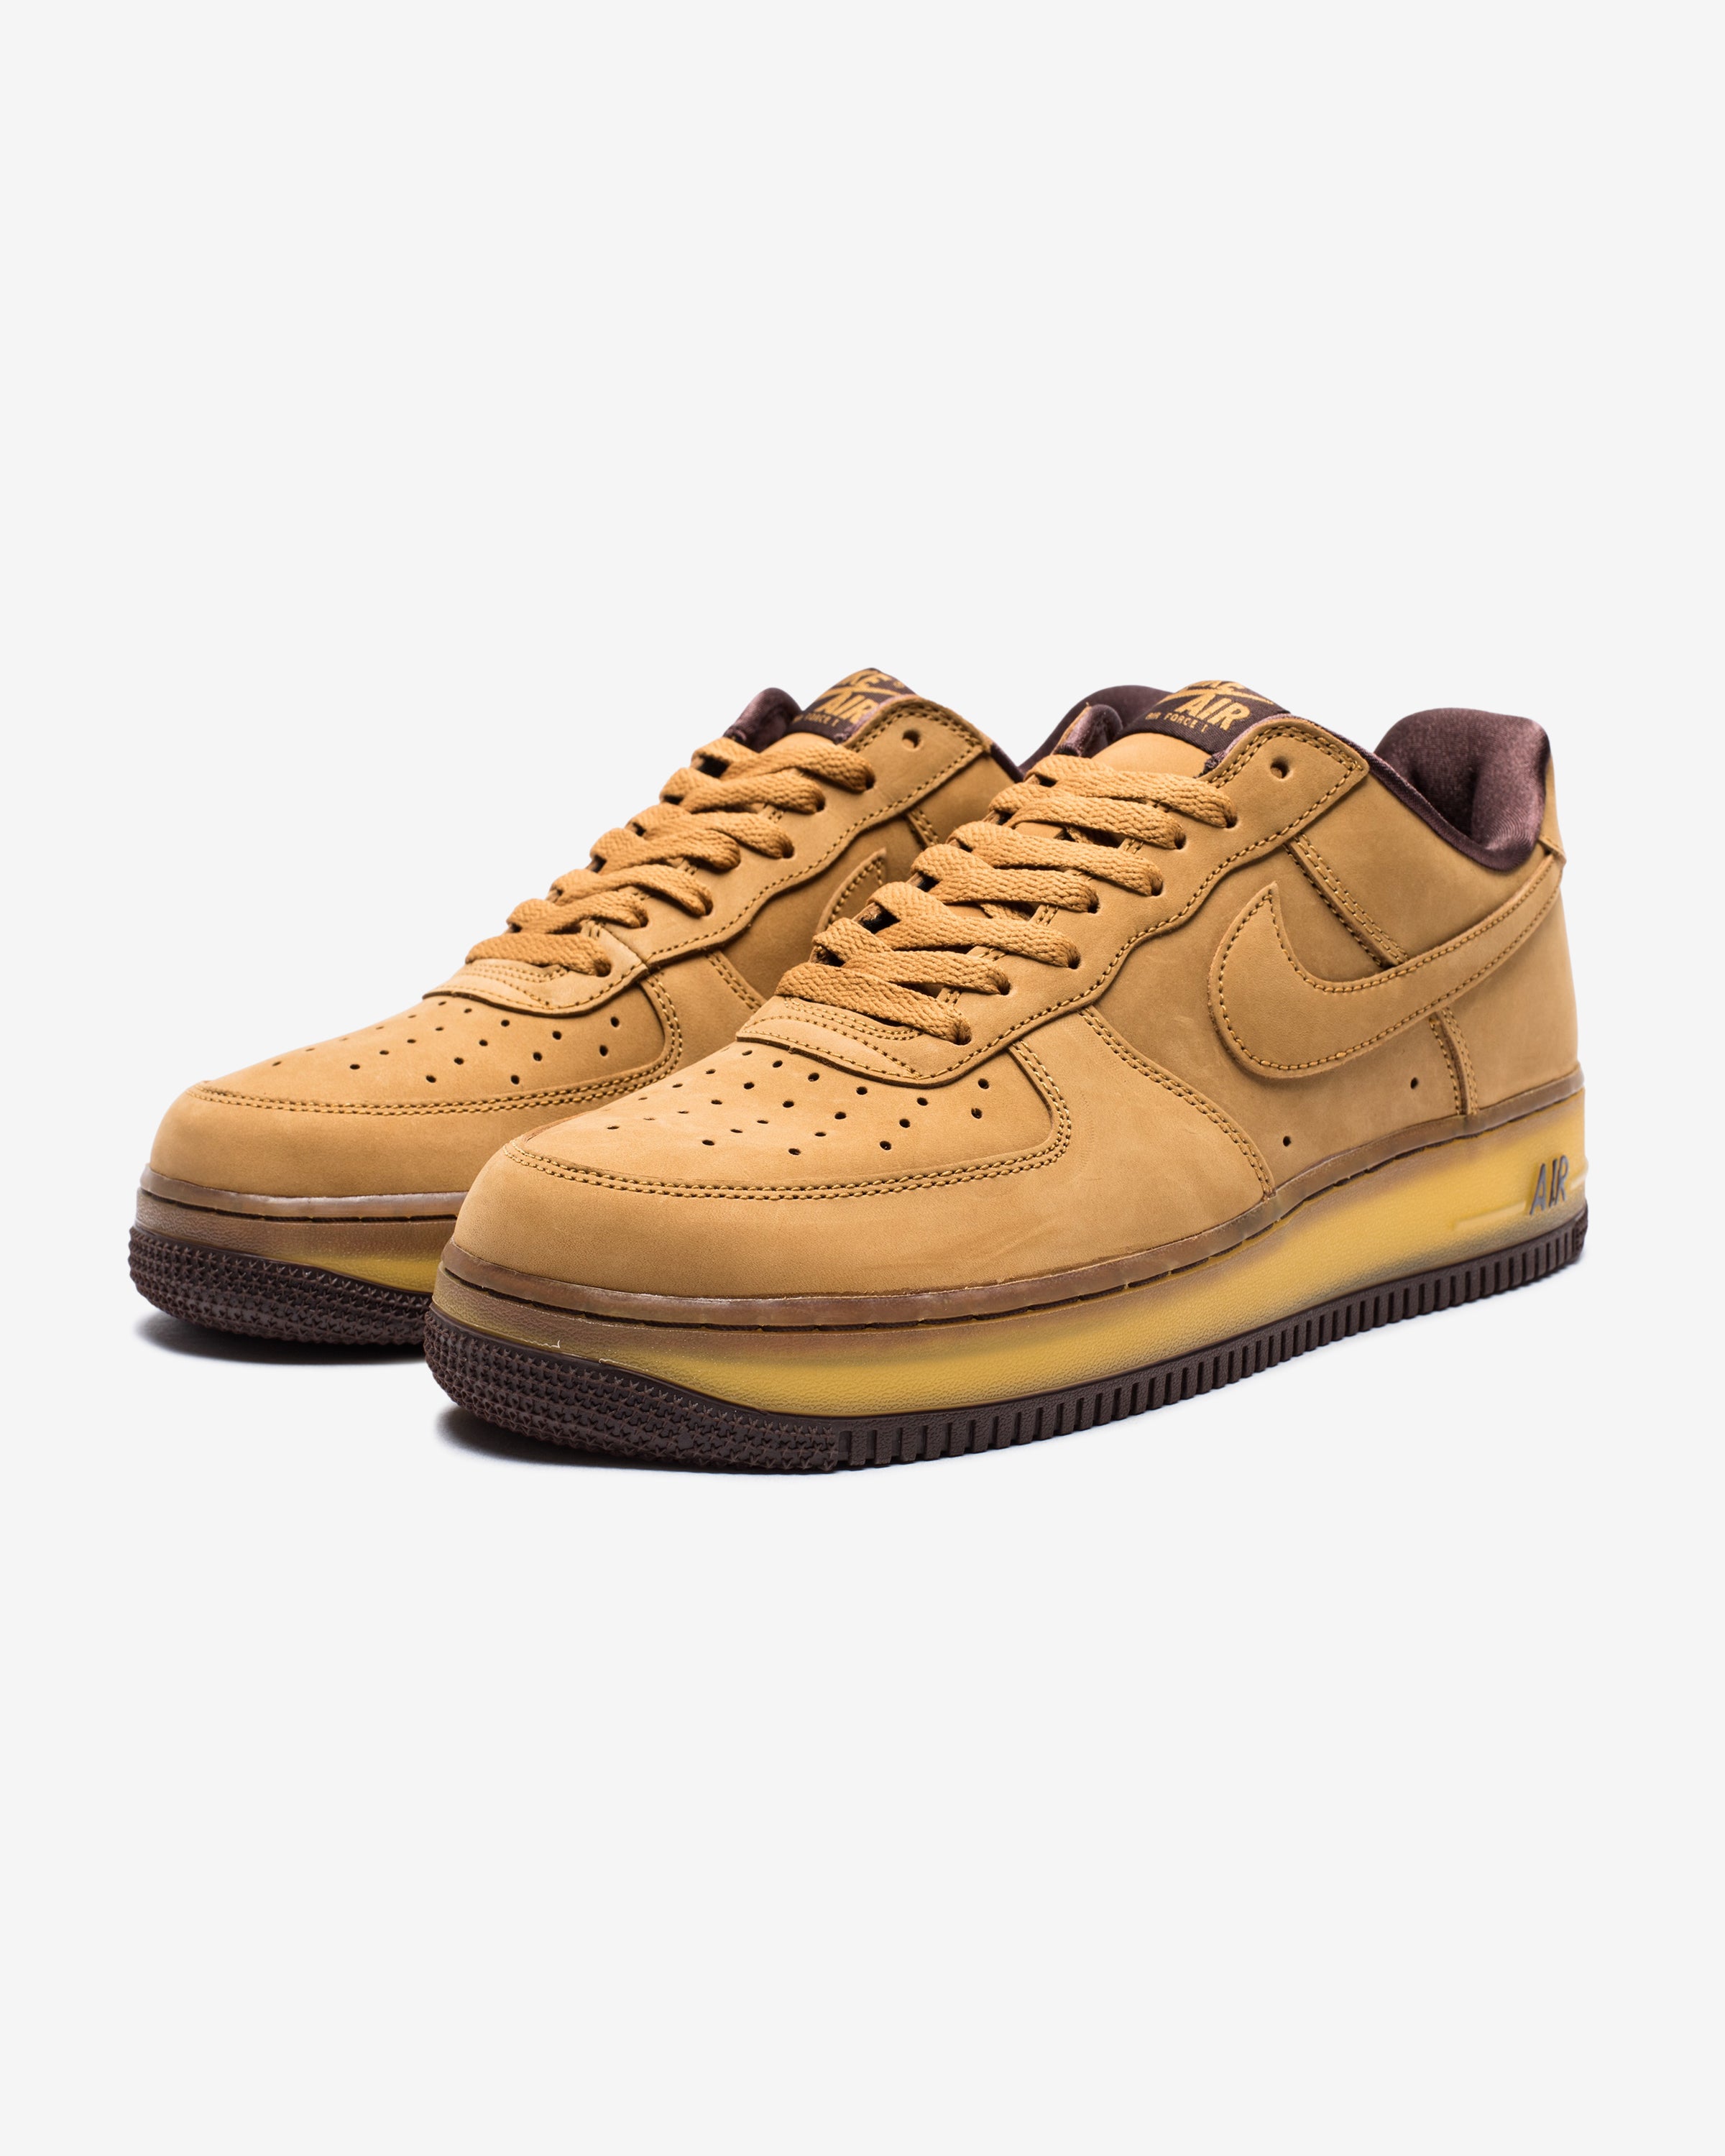 nike air force 1 low retro sp wheat